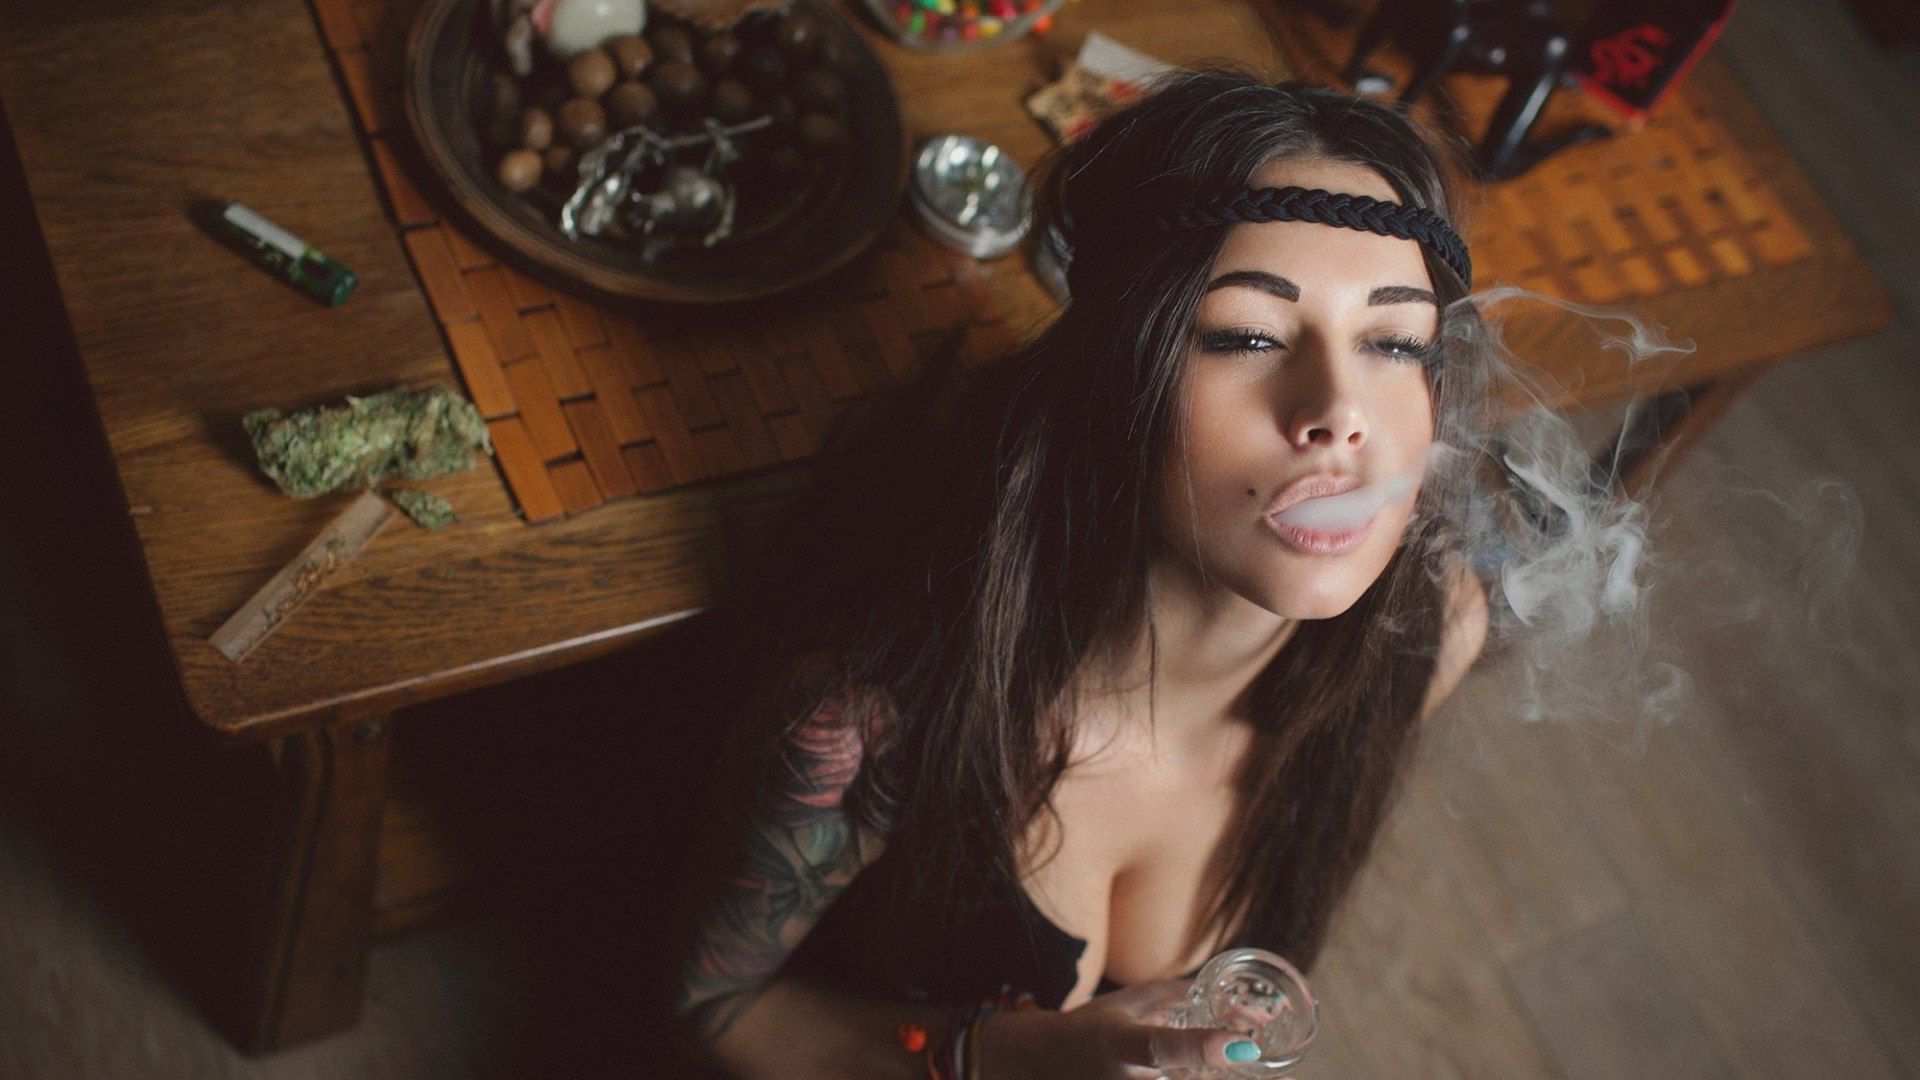 Weed and girls